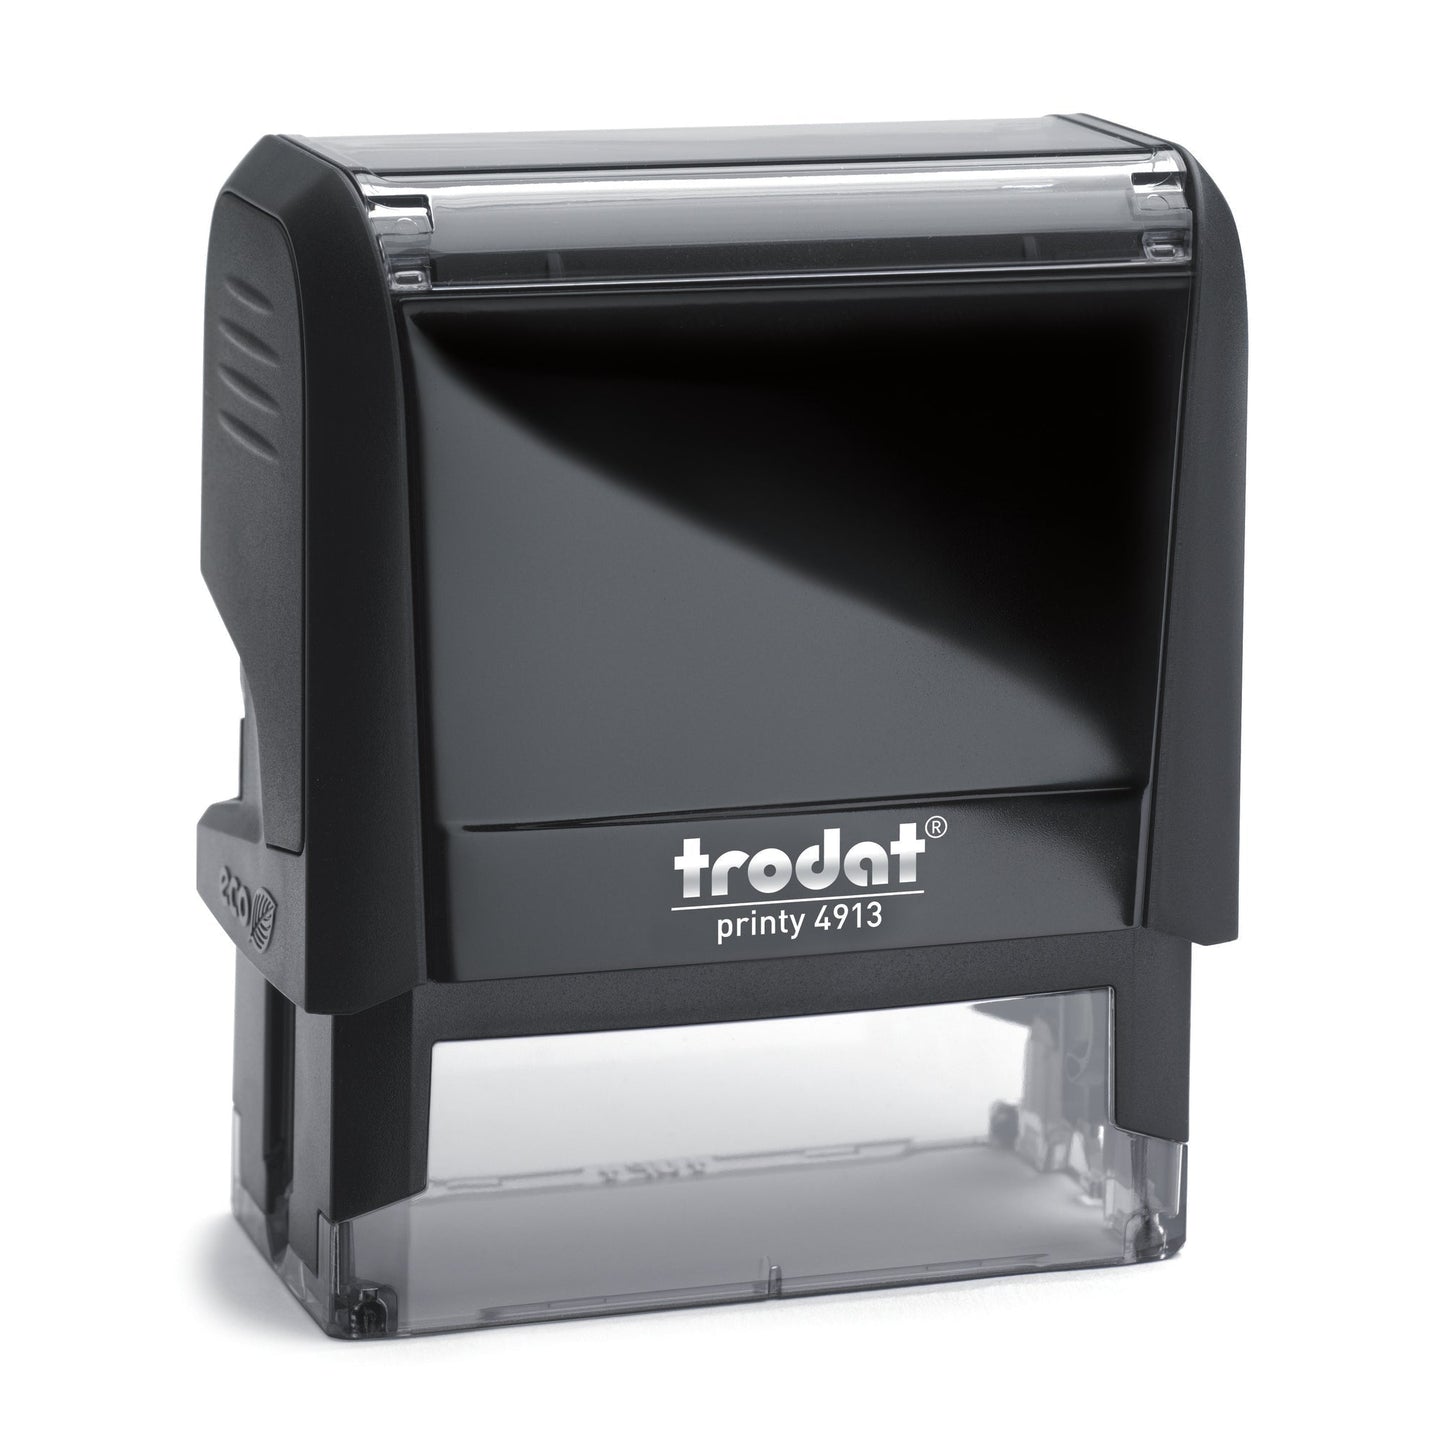 Approved Service With Genuine Parts - Self Inking Rubber Stamp - Trodat 4913 - 55mm x 21mm Impression